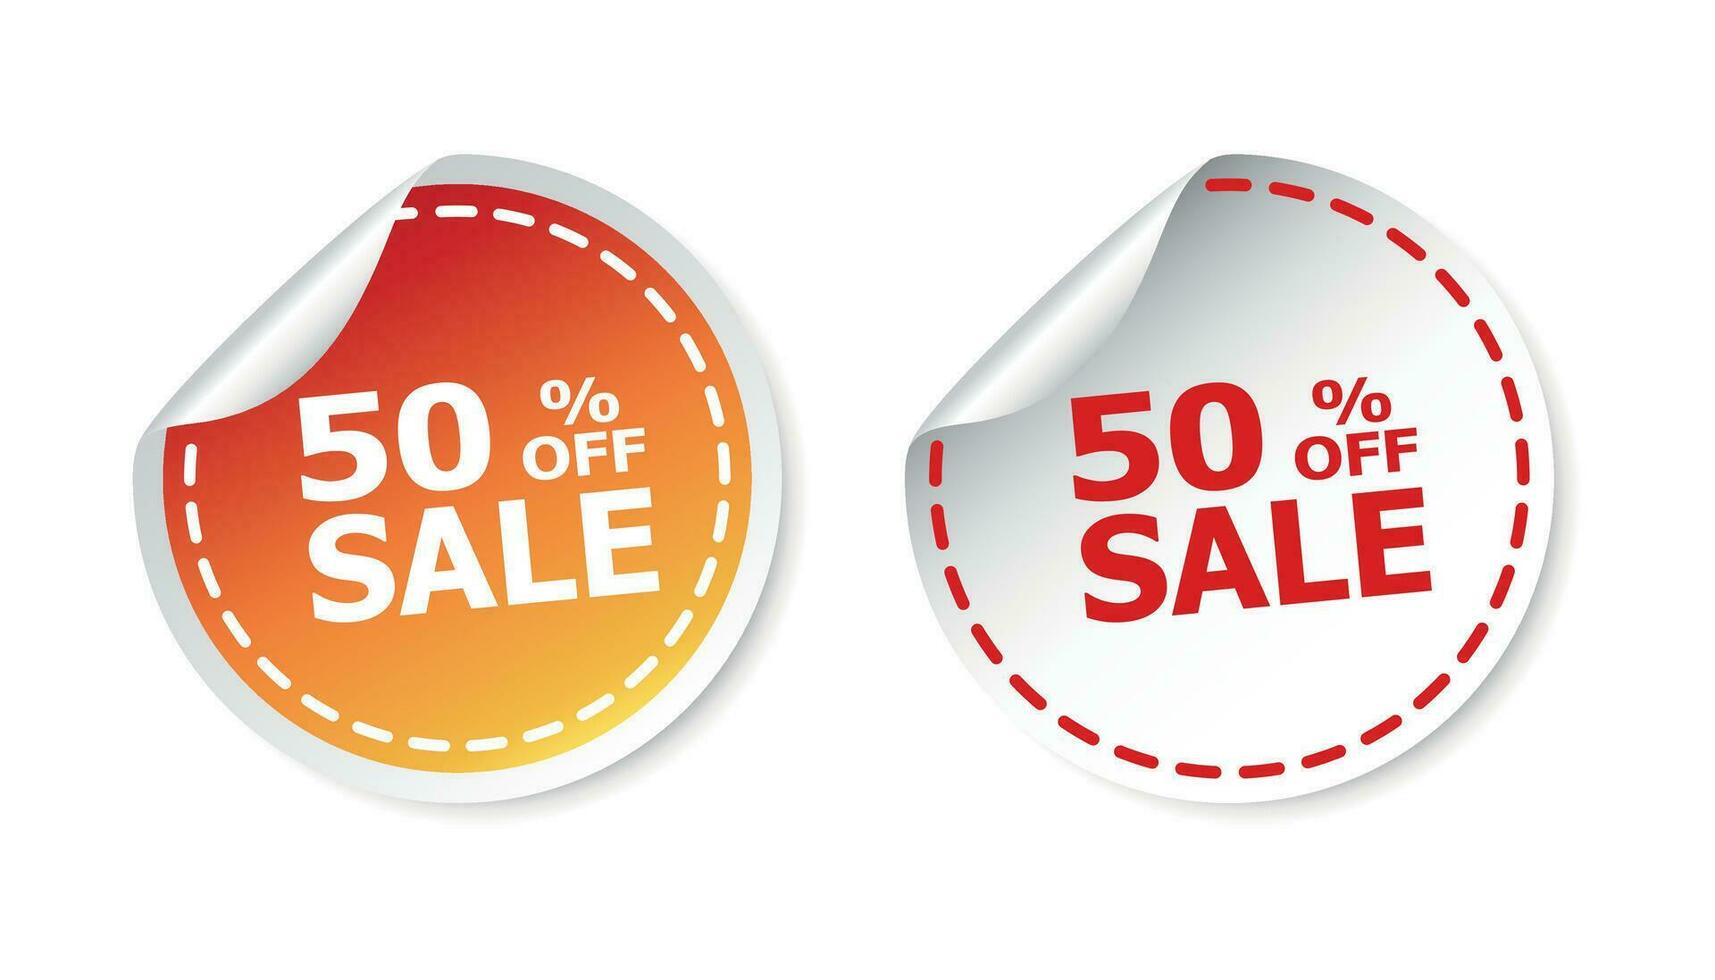 Sale stickers 50 percent off. Vector illustration on white background.